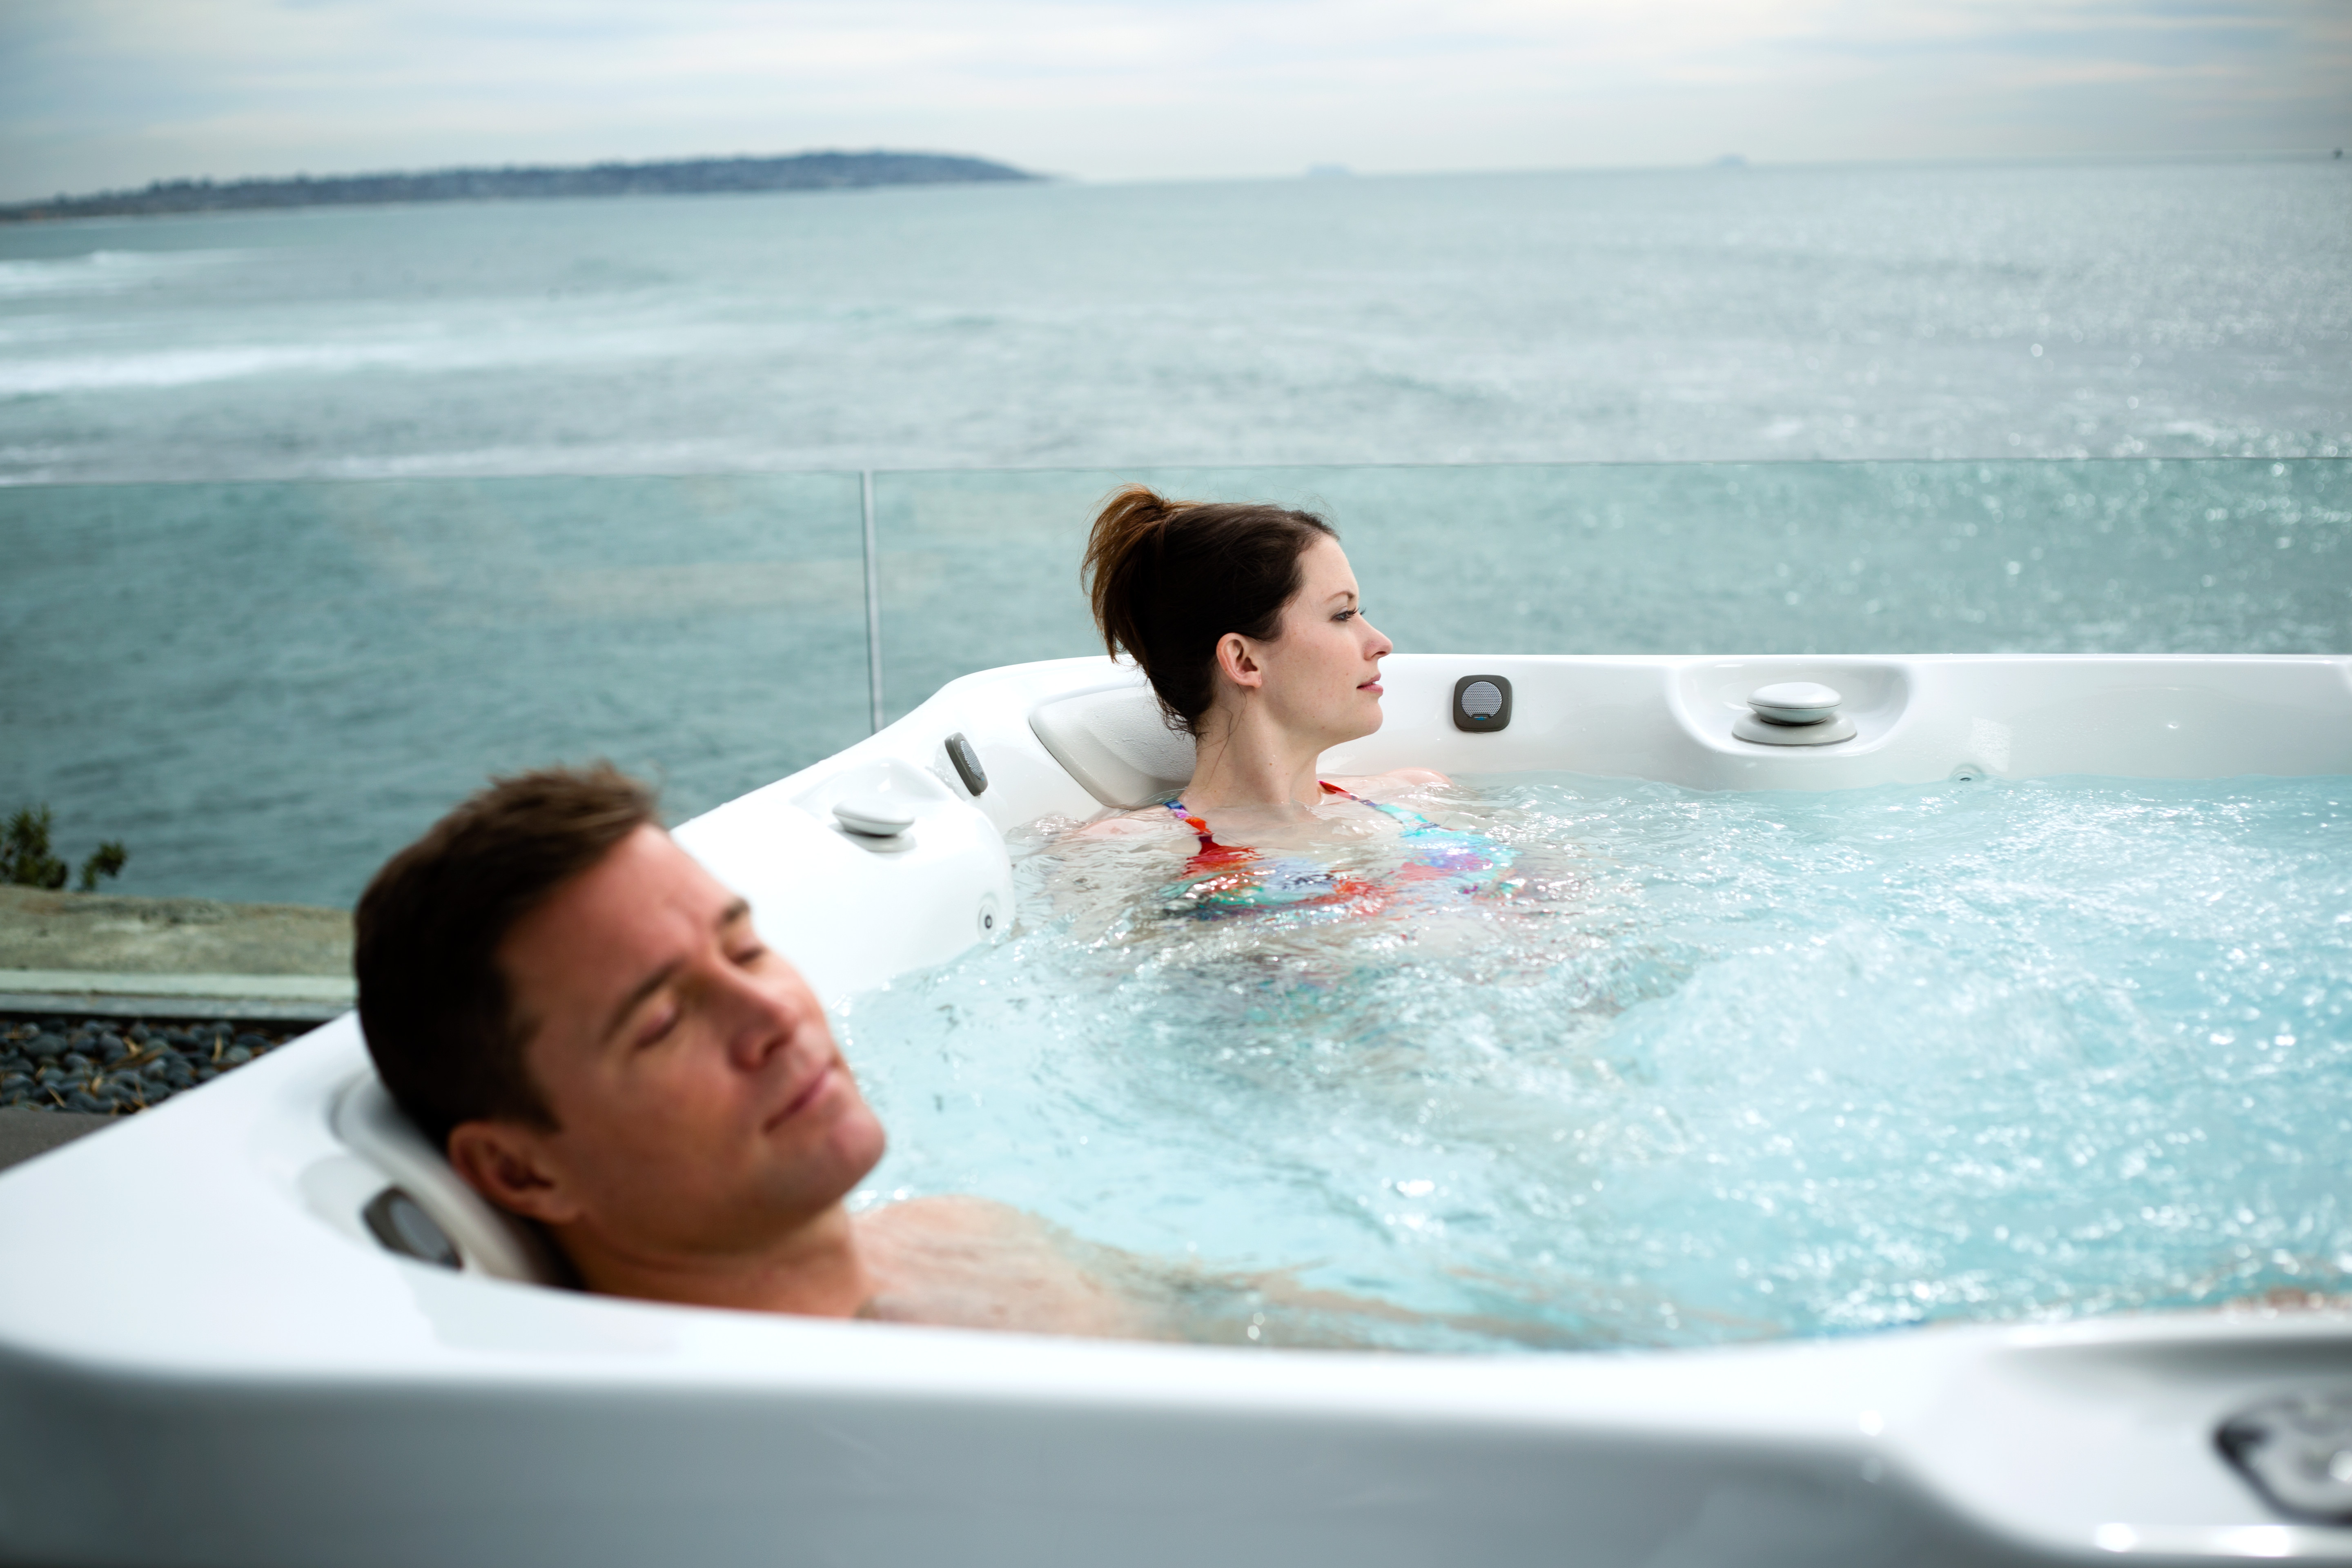 Quality insulation keeps hot tub power consumption in check, no matter the weather.